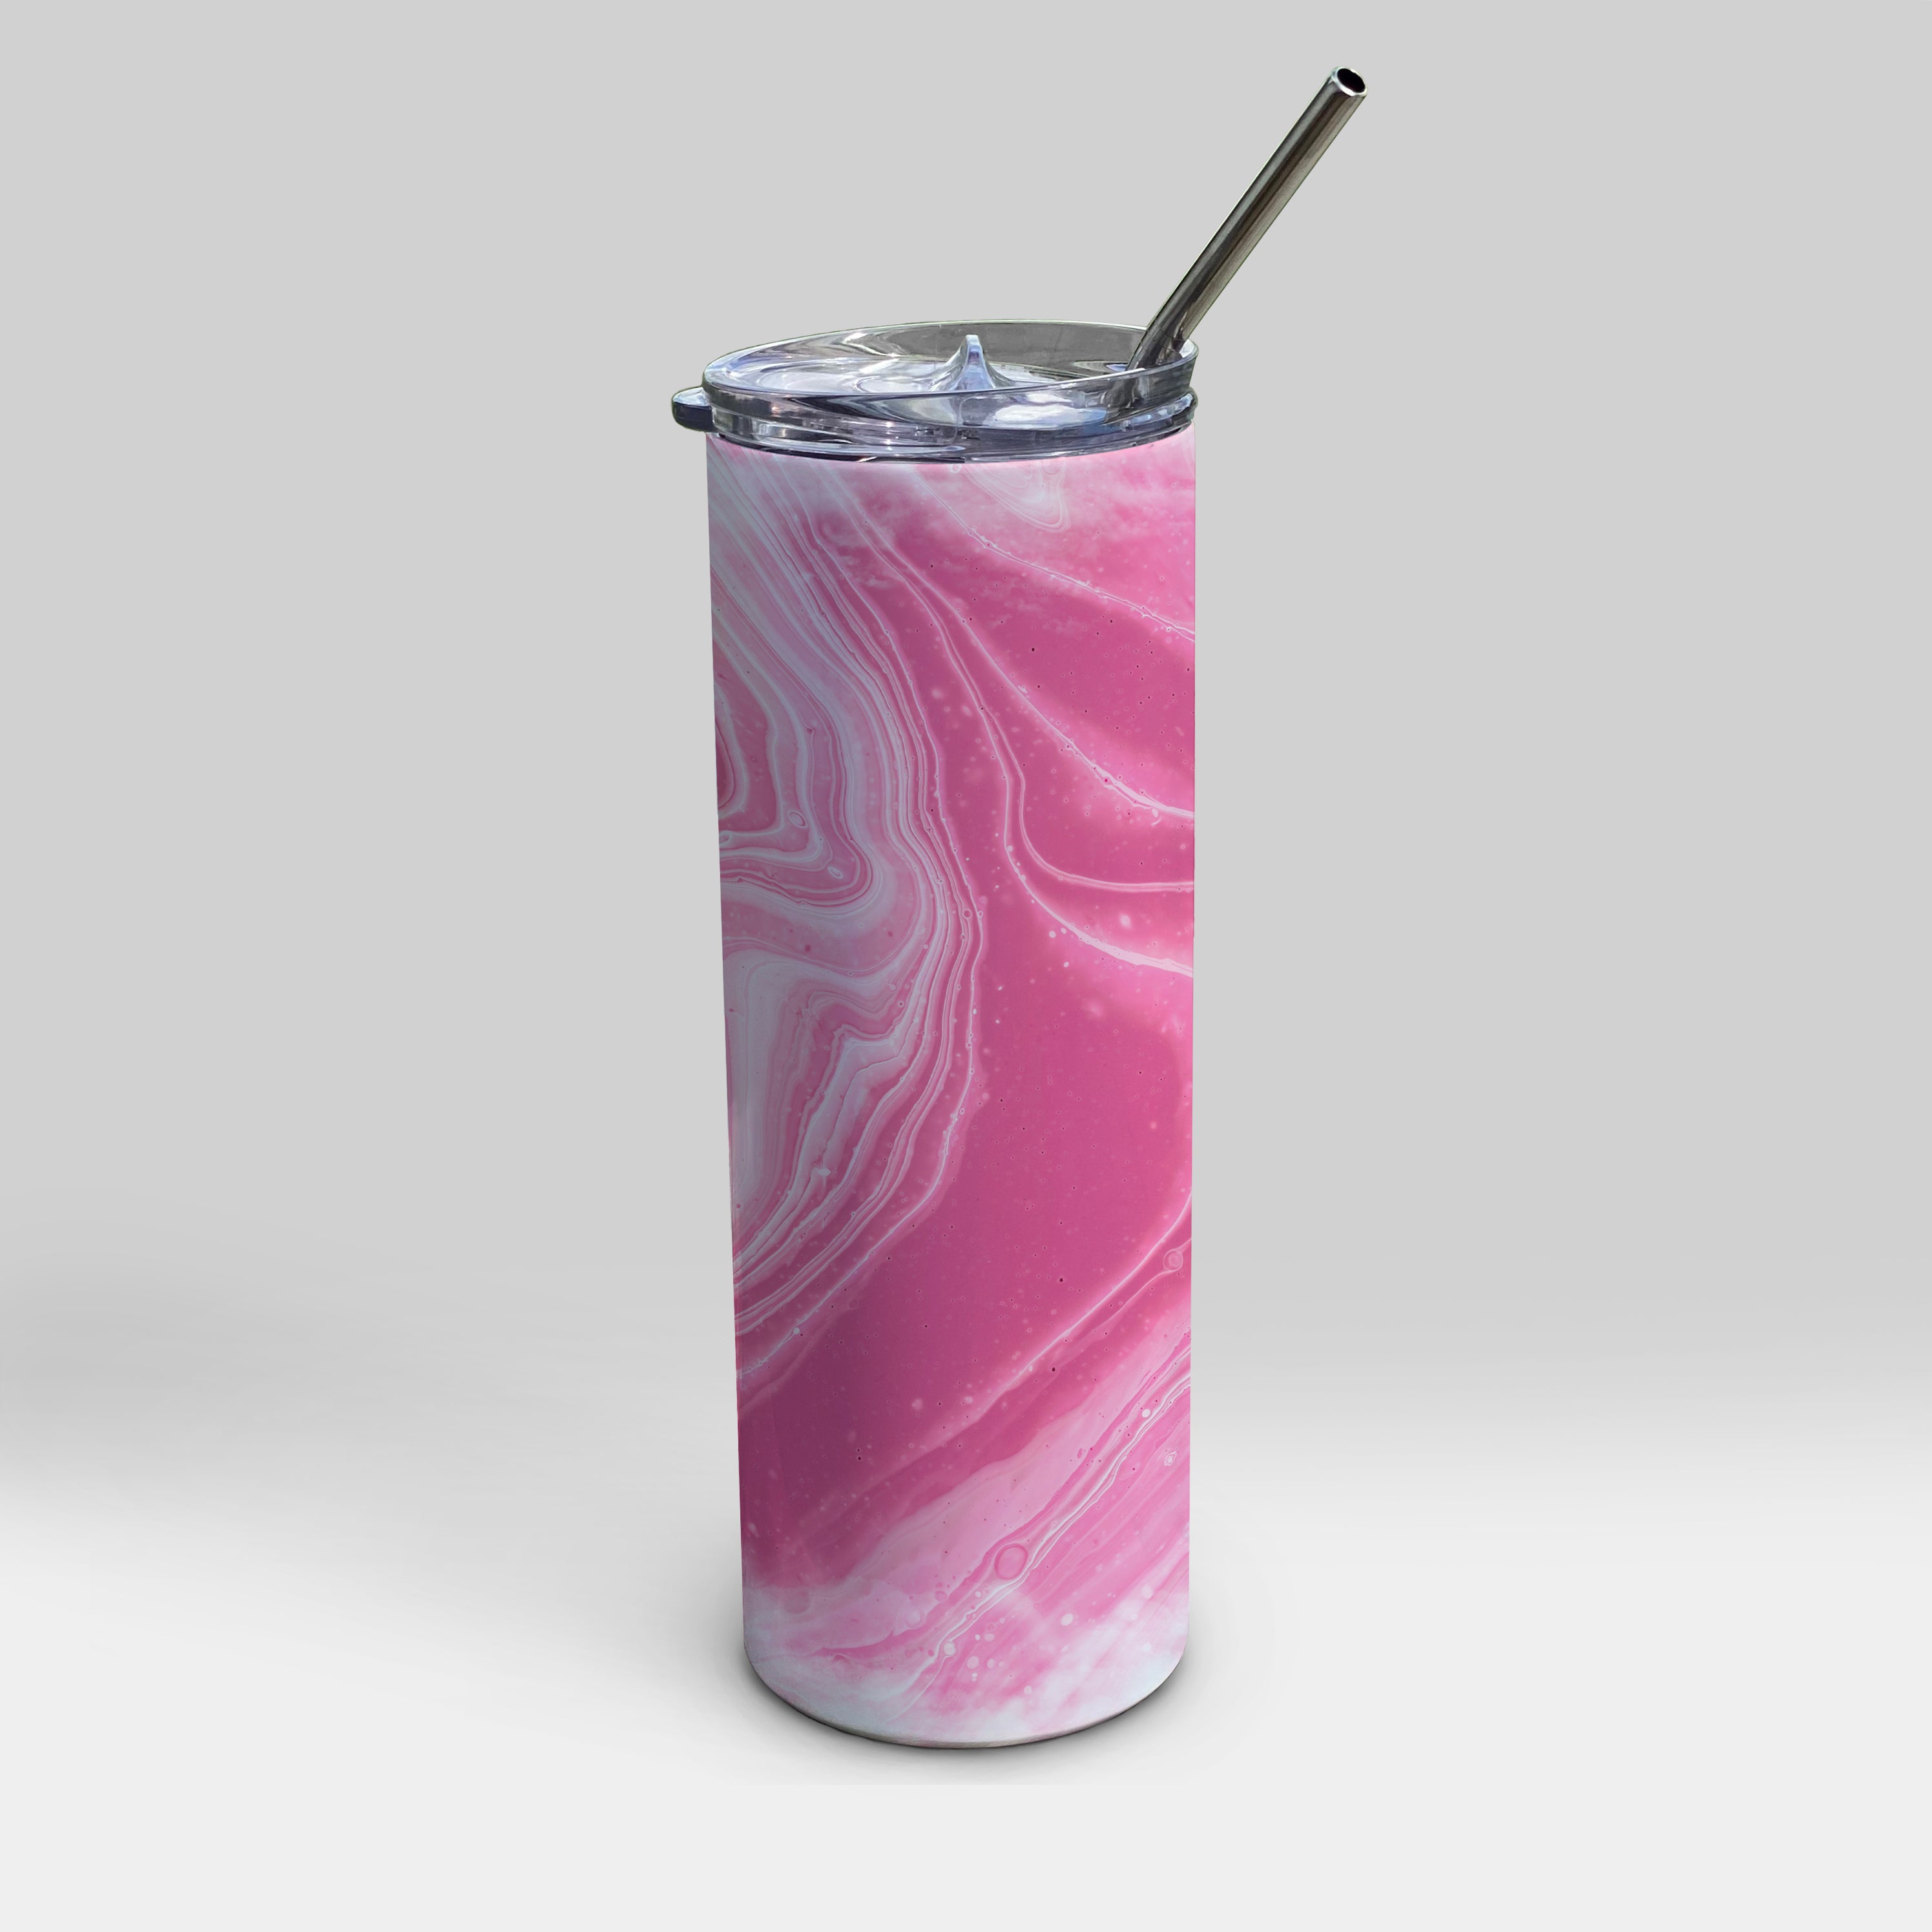 Trend Setters Original (Pink Marble) 20oz Stainless Steel Travel Tumbler with Straw